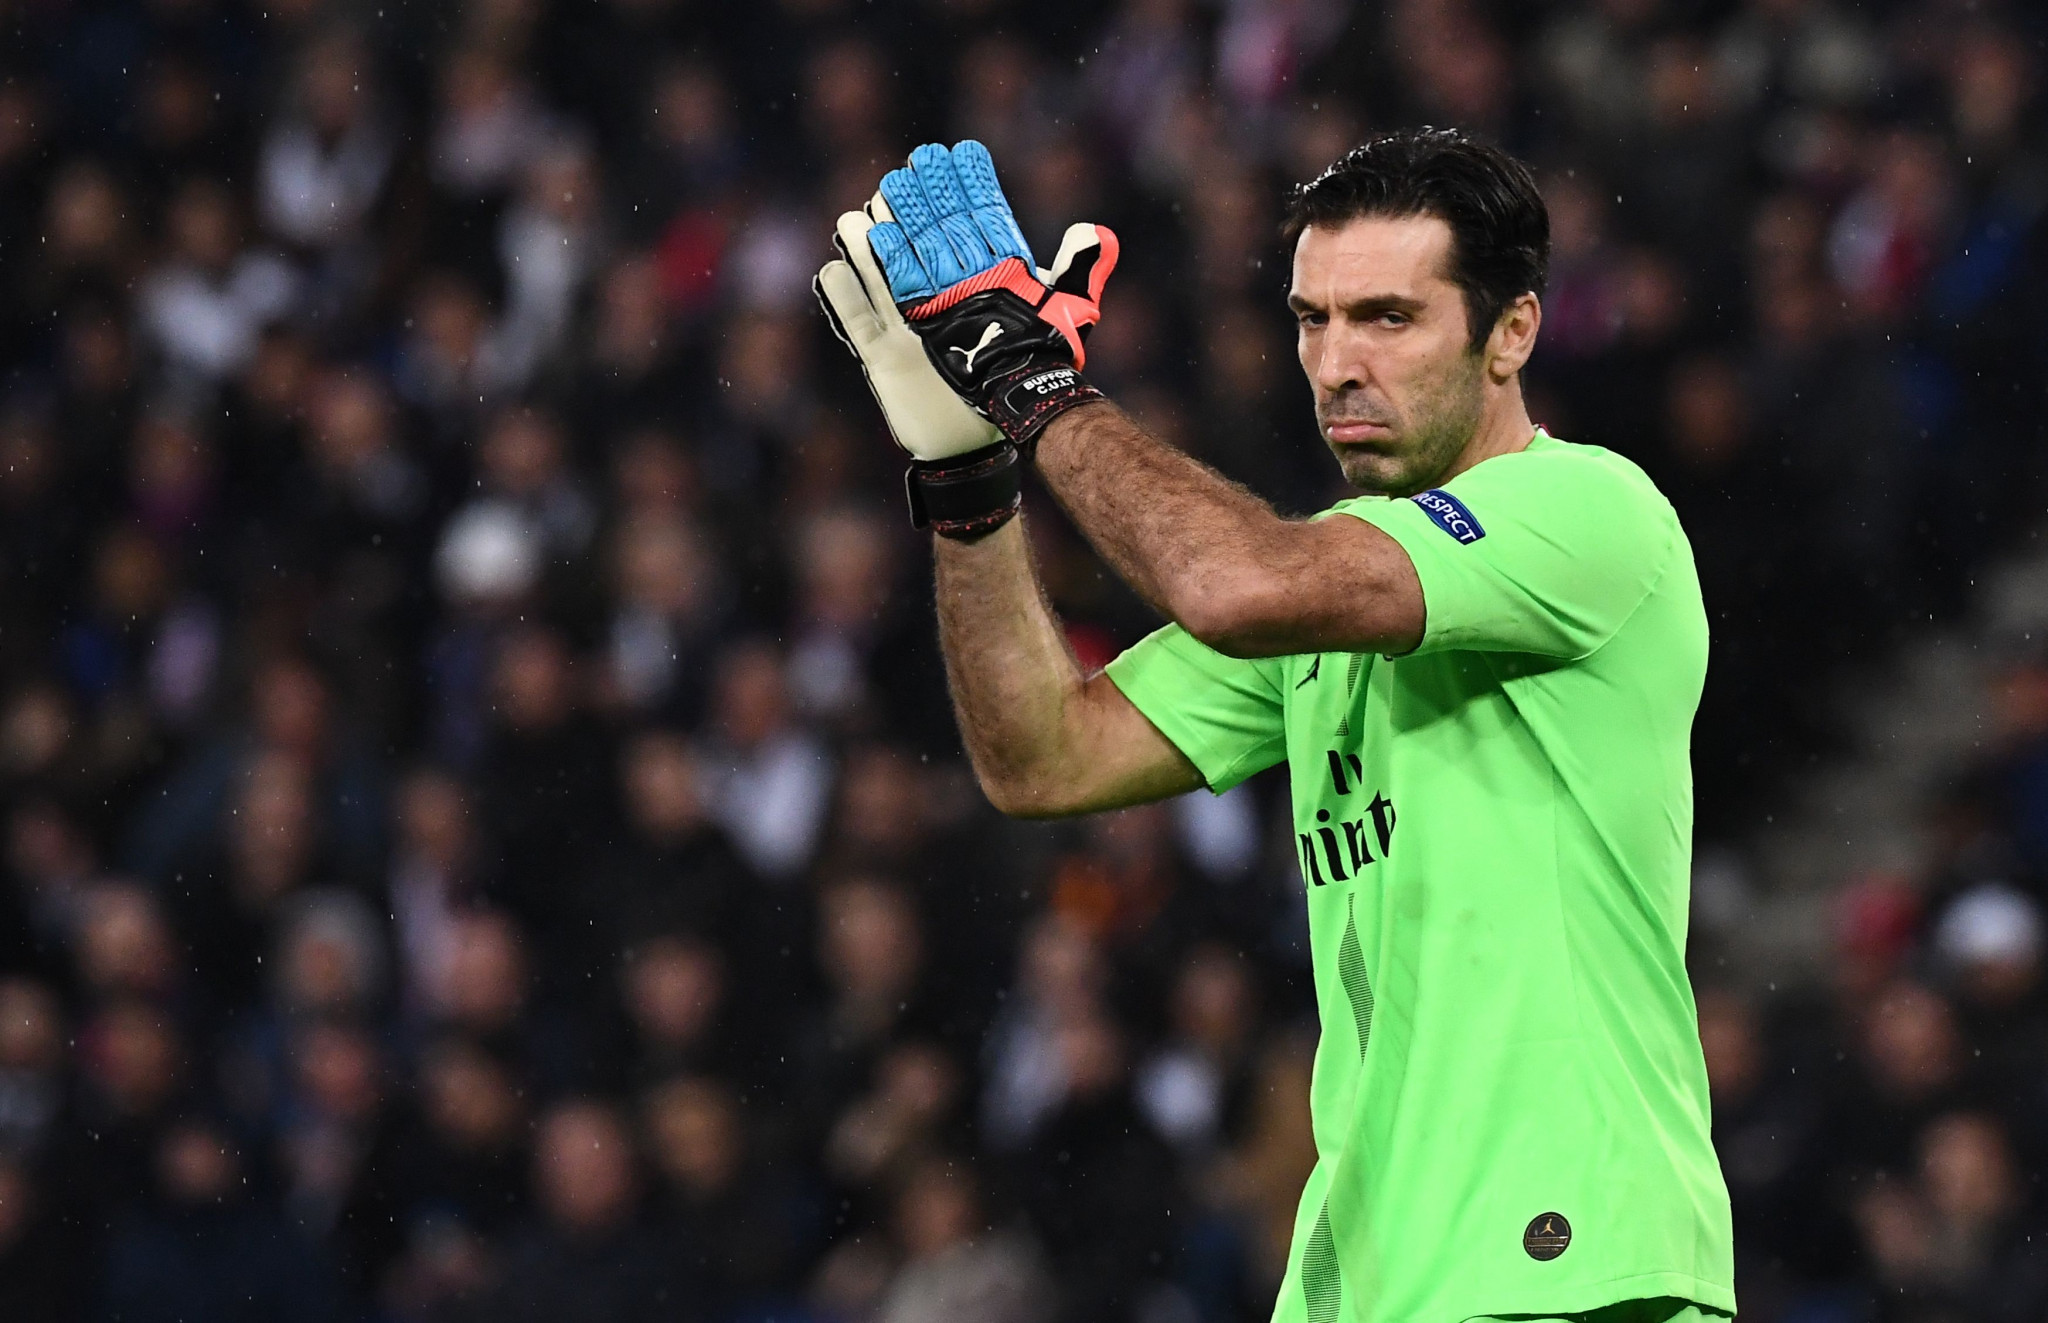 Goalkeeper Gianluigi Buffon is playing for Paris Saint-Germain at 41 years old ©Getty Images